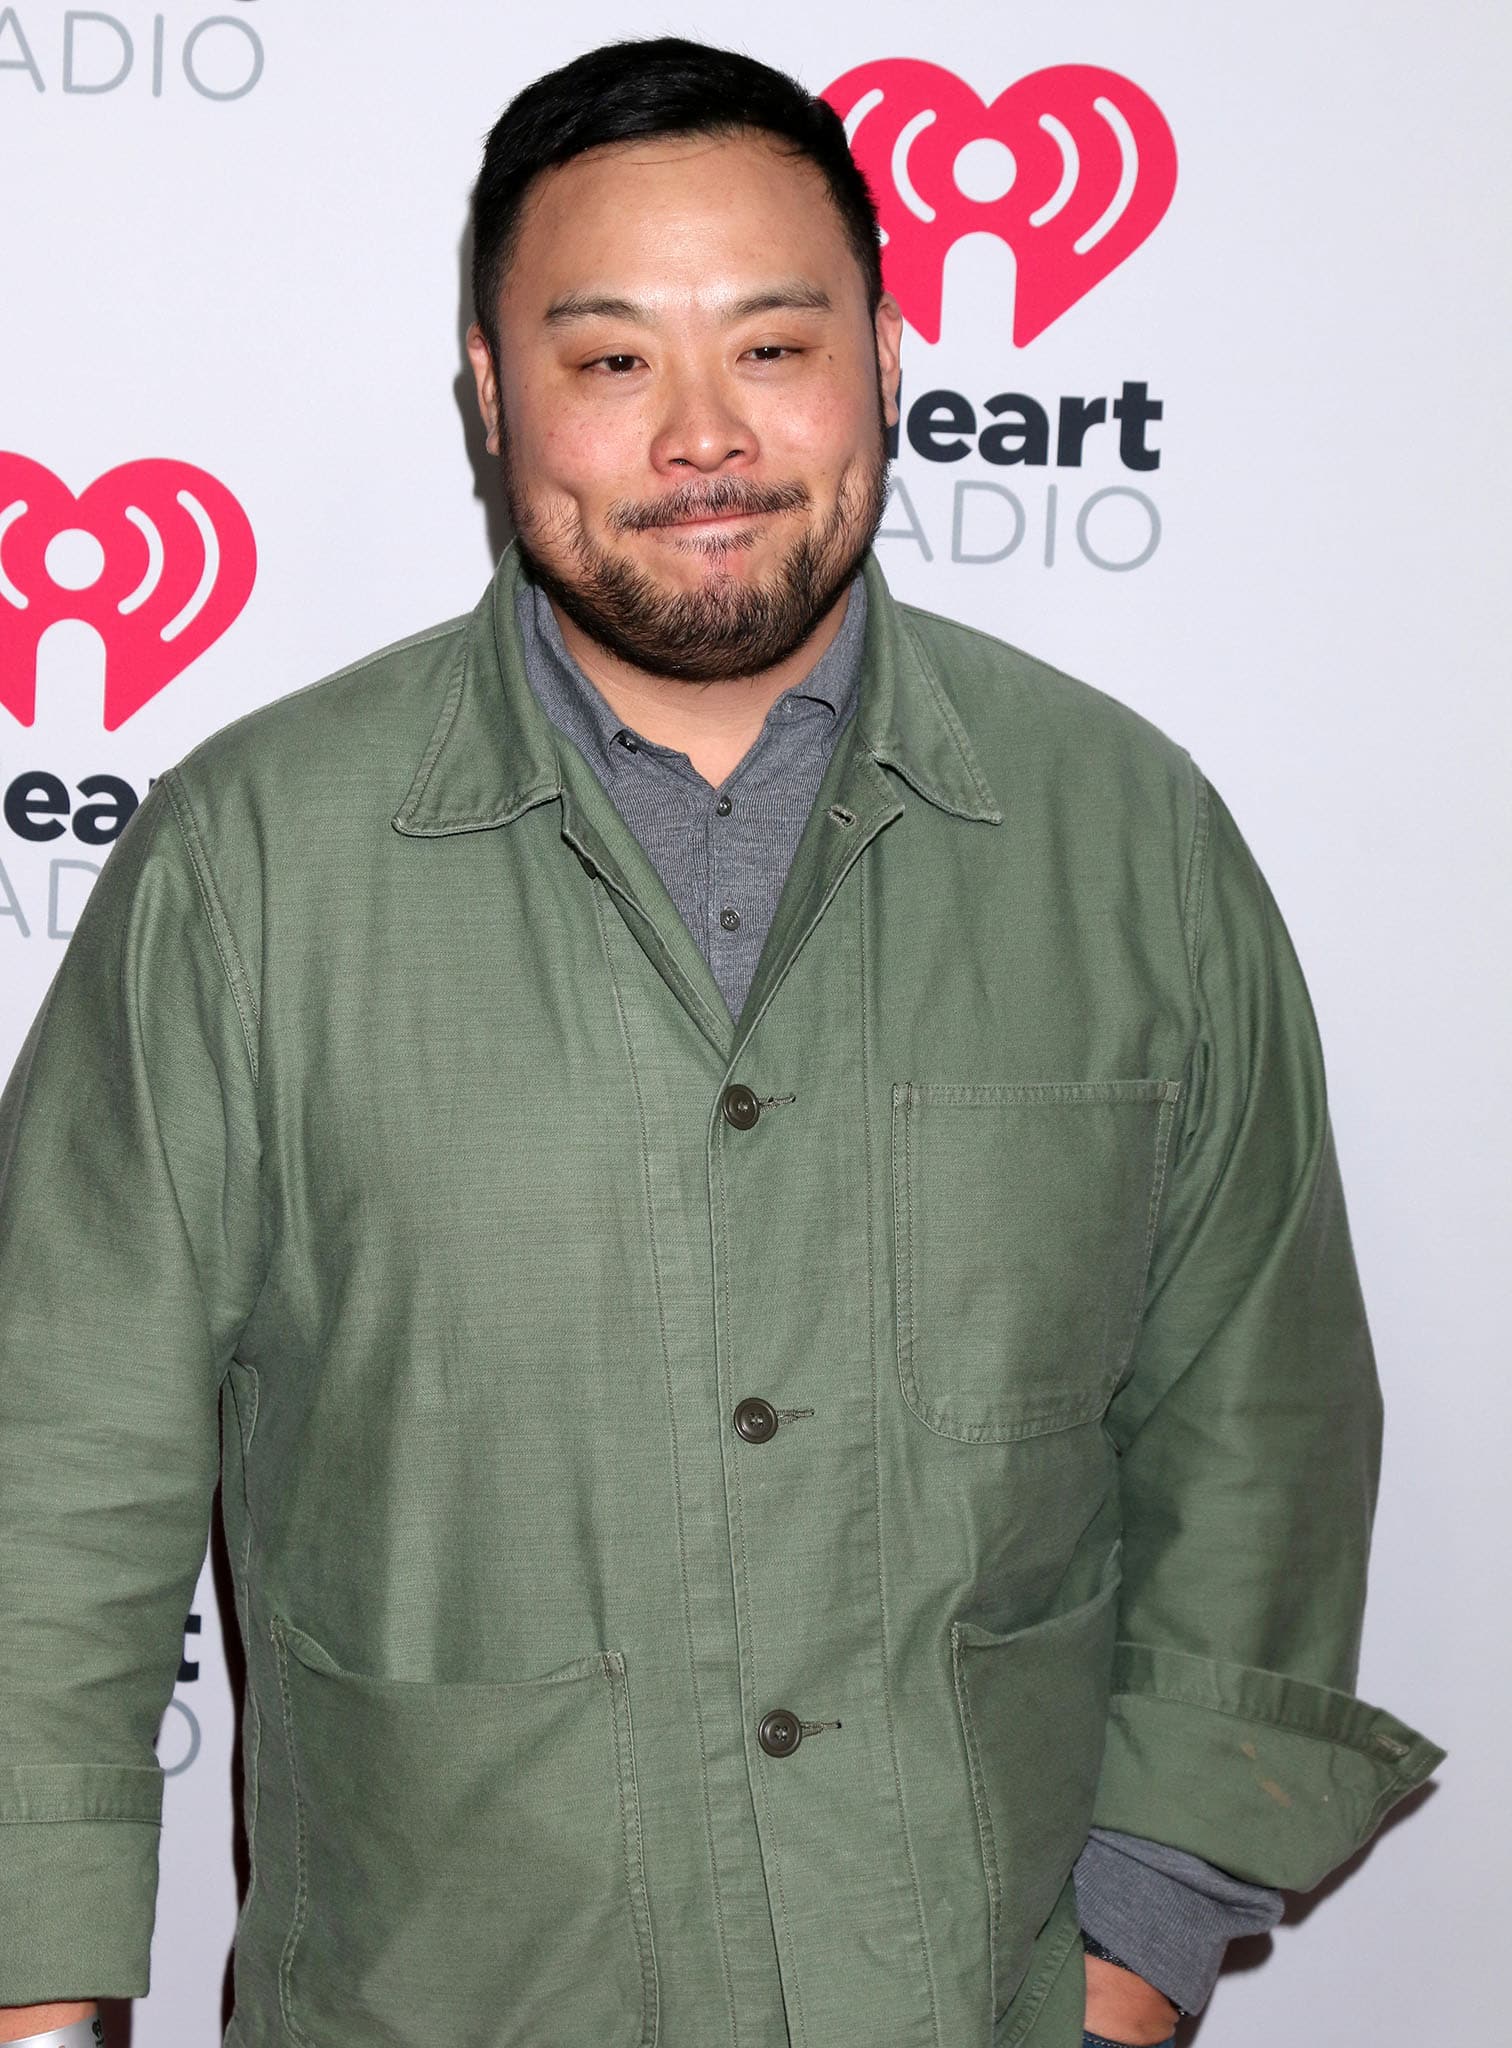 Momofuku restaurant group founder David Chang is also known for producing and starring in several Netflix shows, including Ugly Delicious